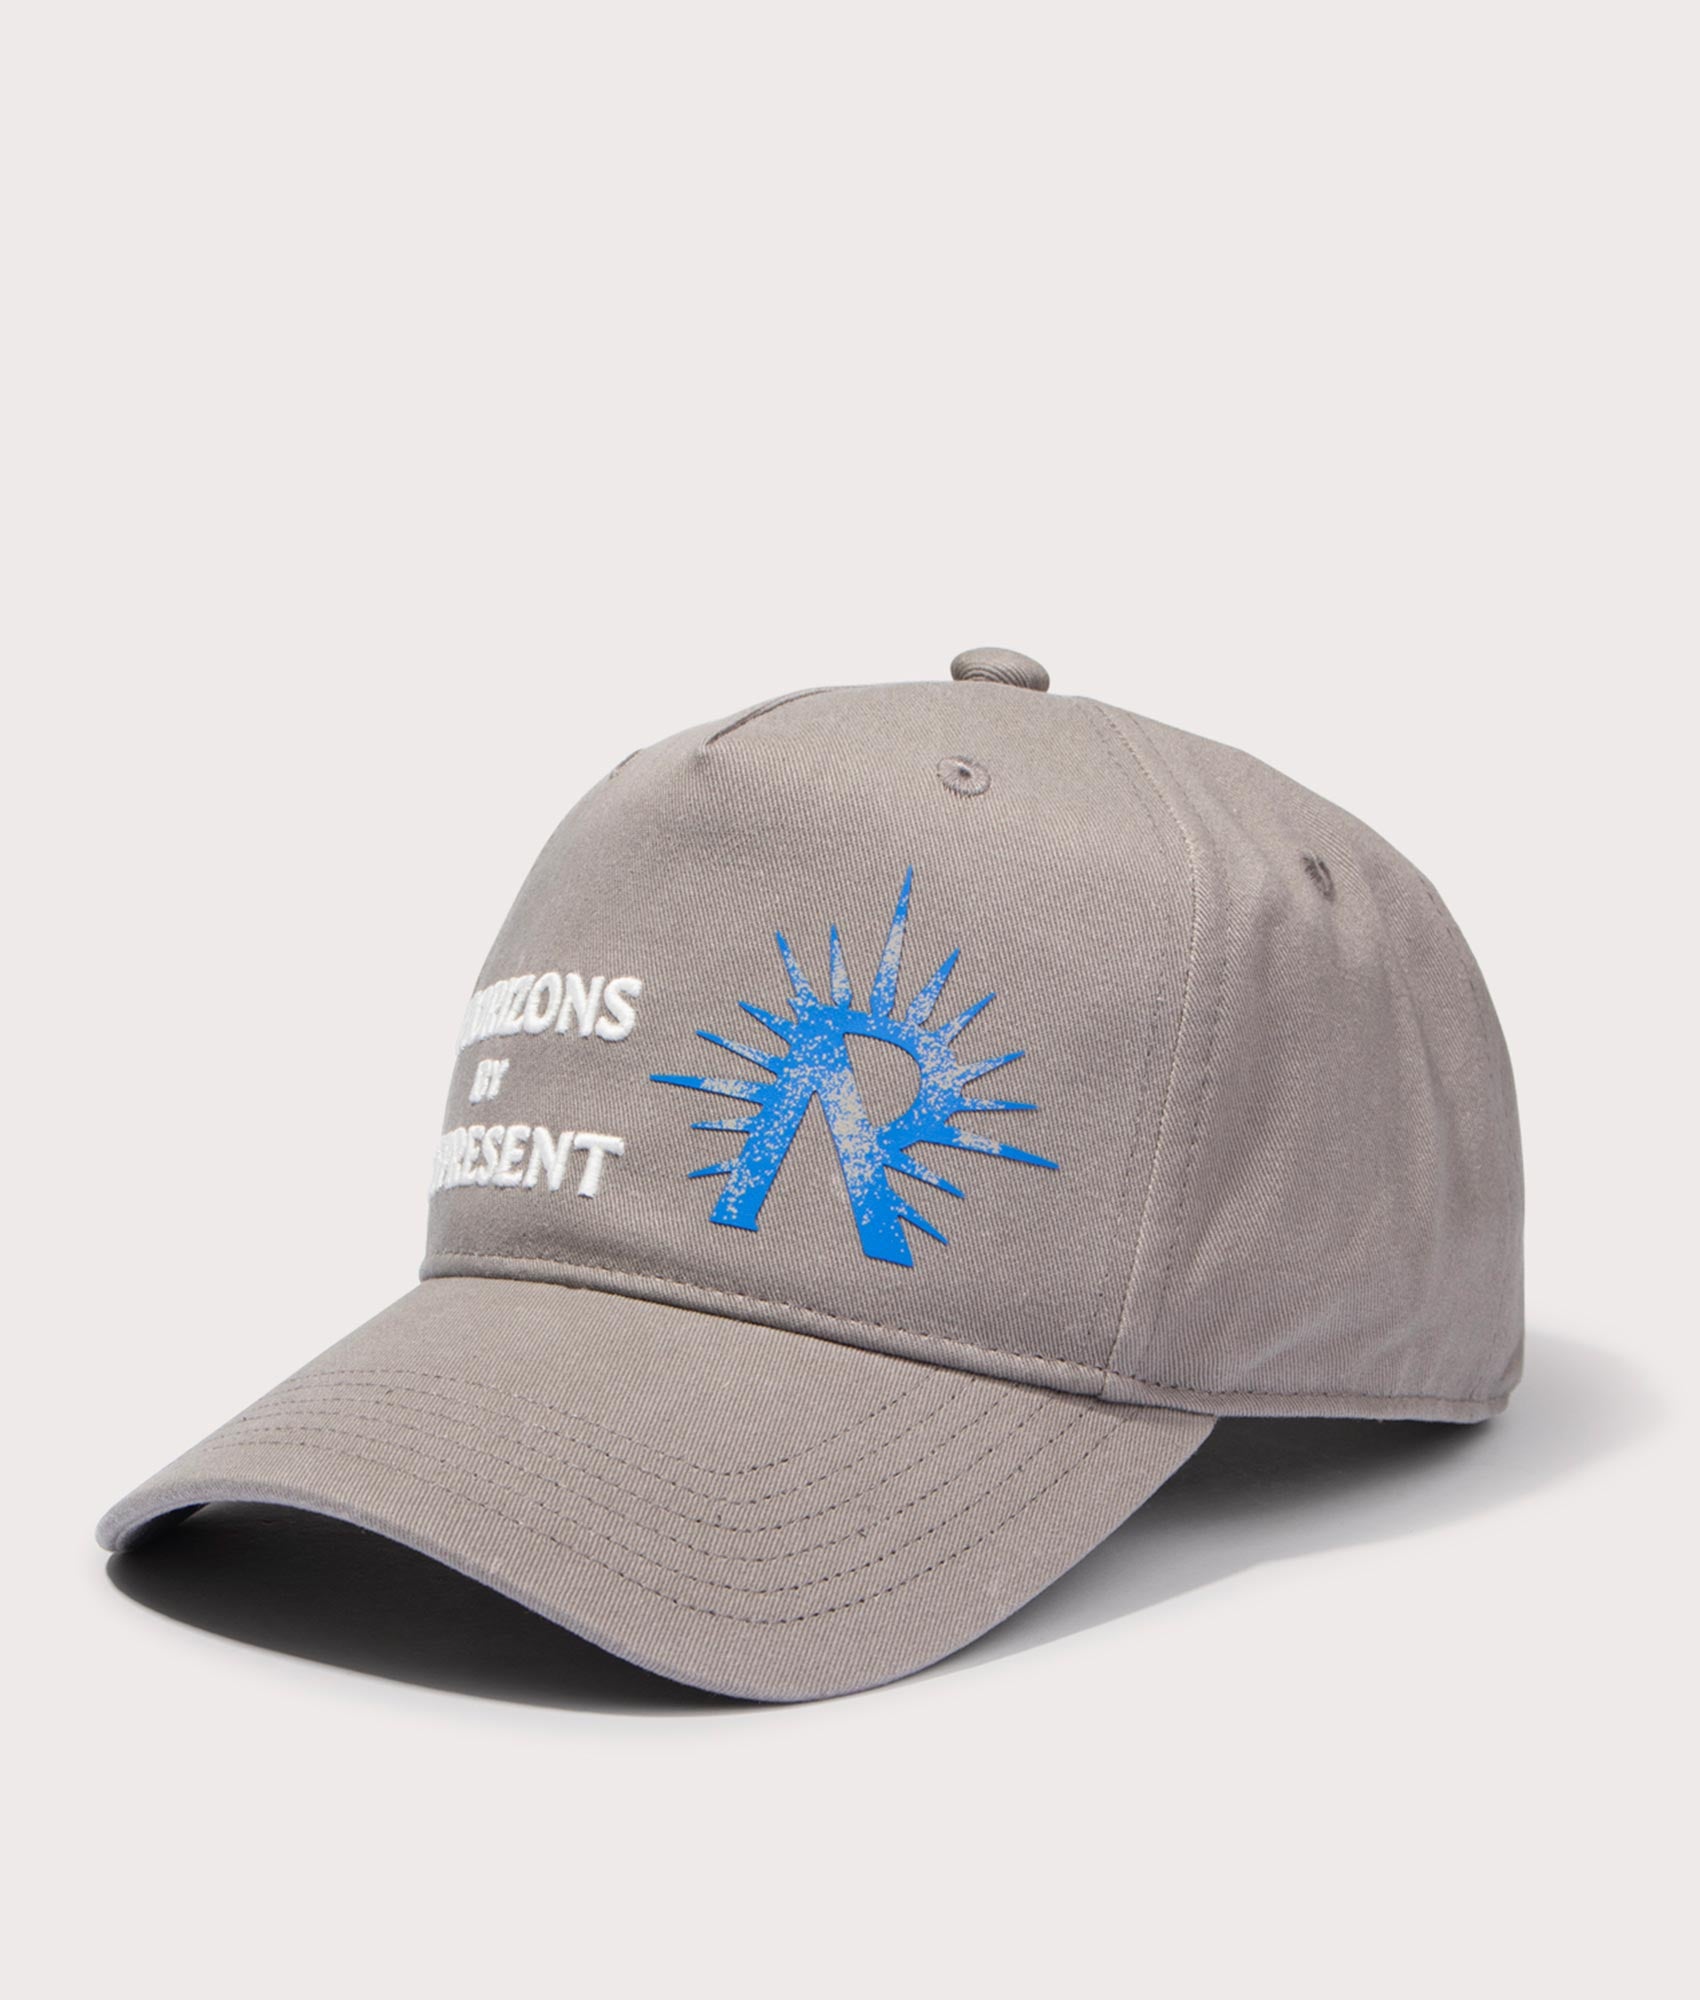 Represent Mens Horizons Cap - Colour: 431 Washed Taupe - Size: One Size